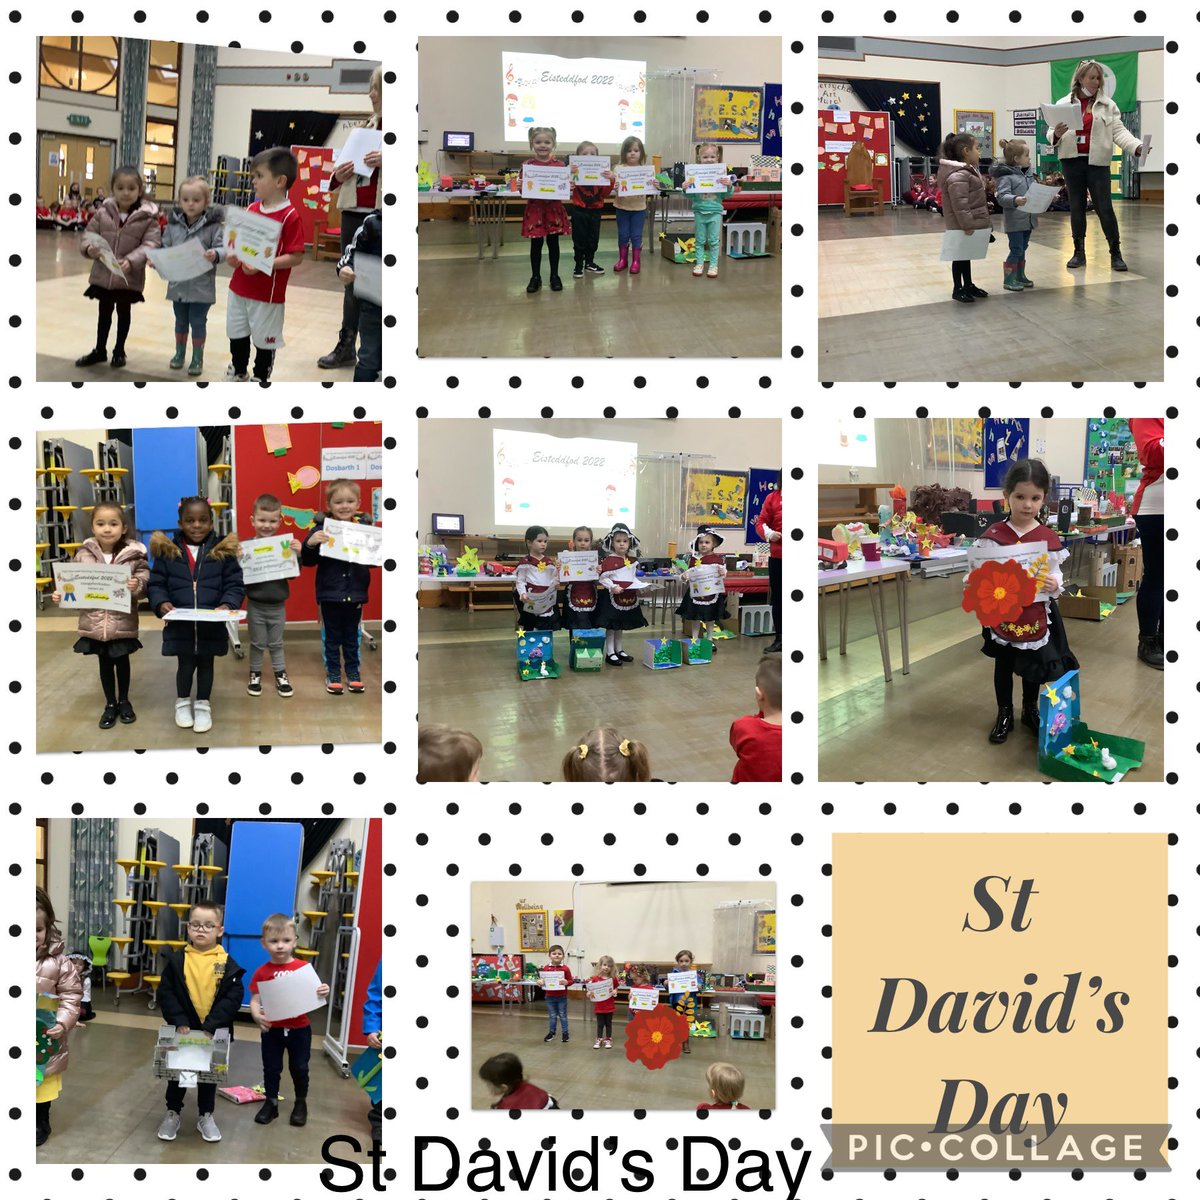 Meithrin have had so much fun celebrating St David’s Day. Children have worked incredibly hard to produce outstanding work for Eisteddfod competition. A huge congratulations to the winners! @garntegprimary @mrshdarmanin95 @MrATully95 @MissSChanning95 @MissDalton98